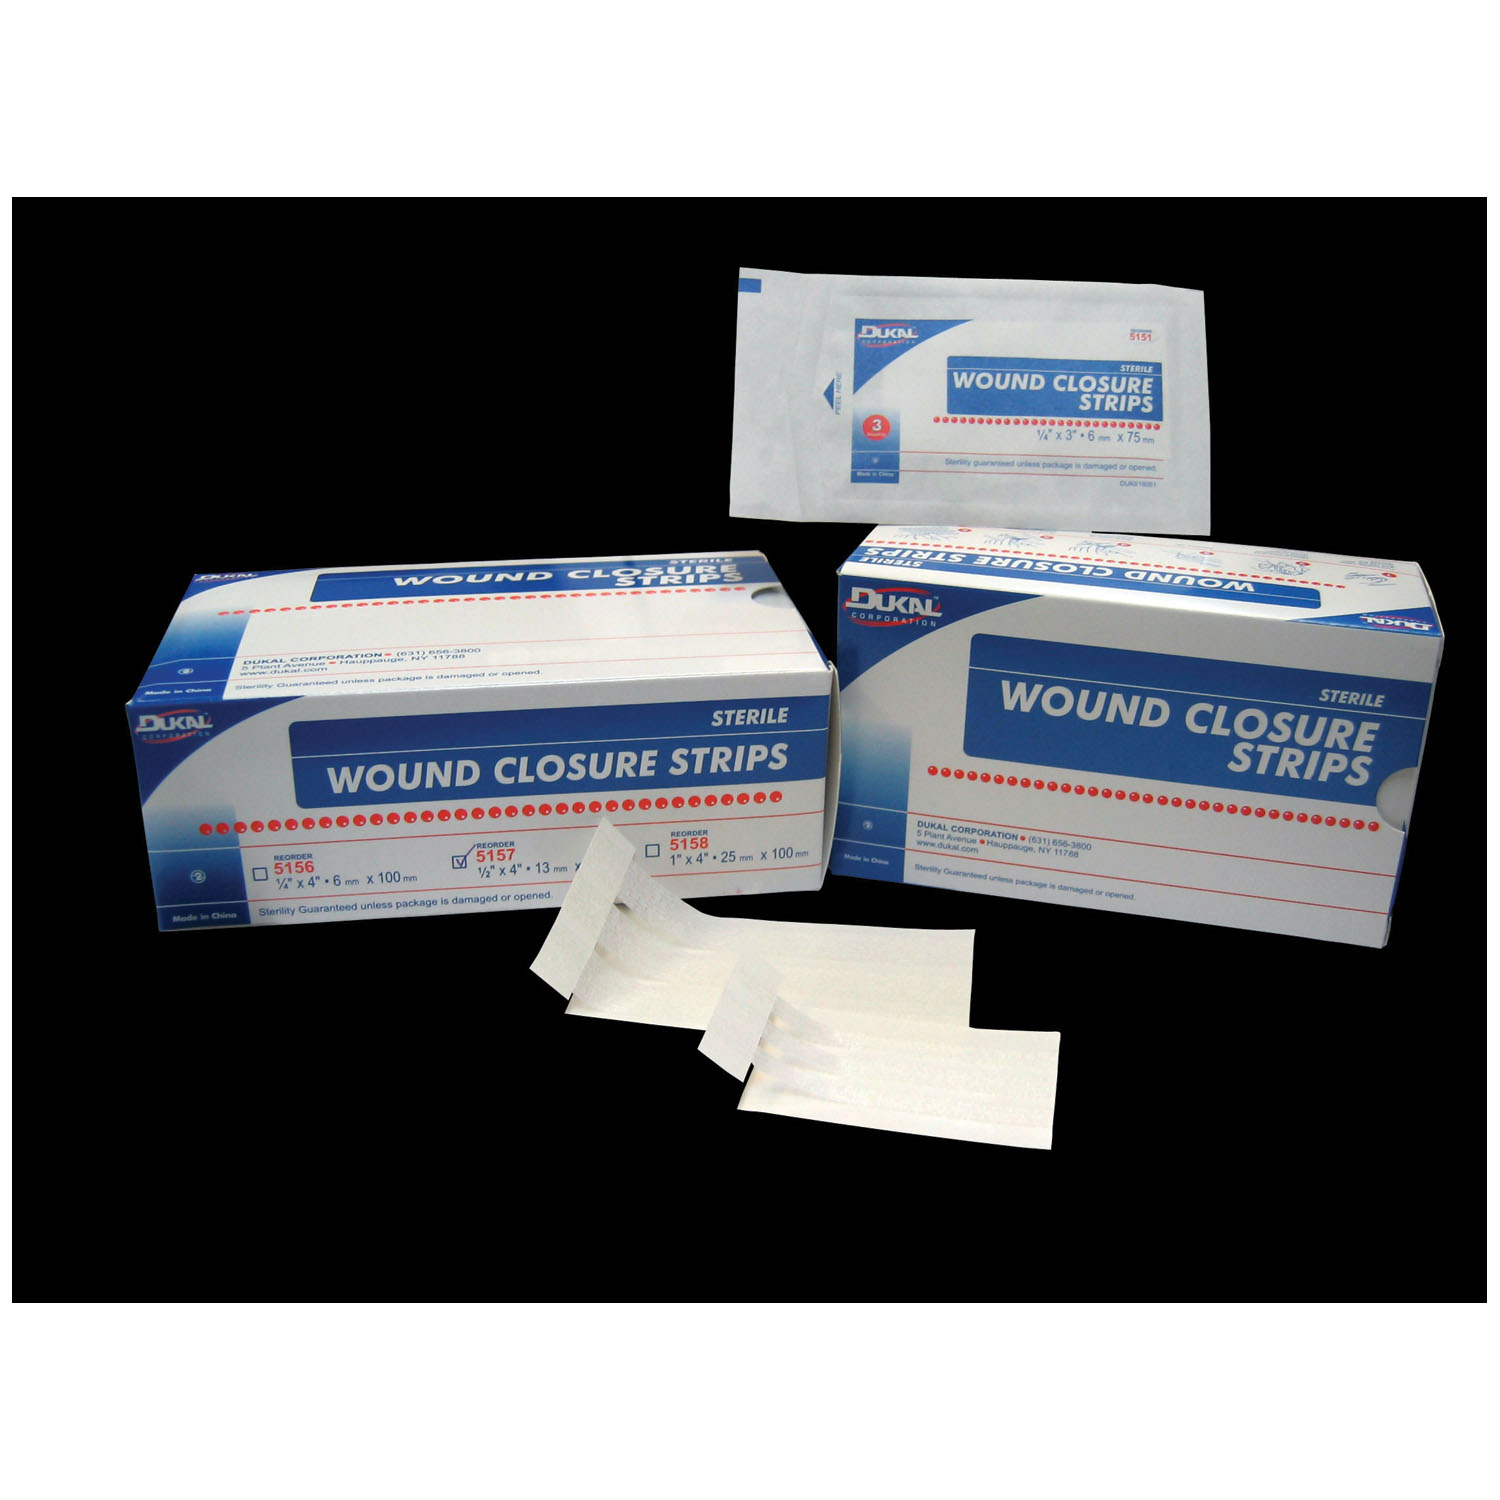 DUKAL WOUND CLOSURE STRIPS : 5157 CS $189.85 Stocked